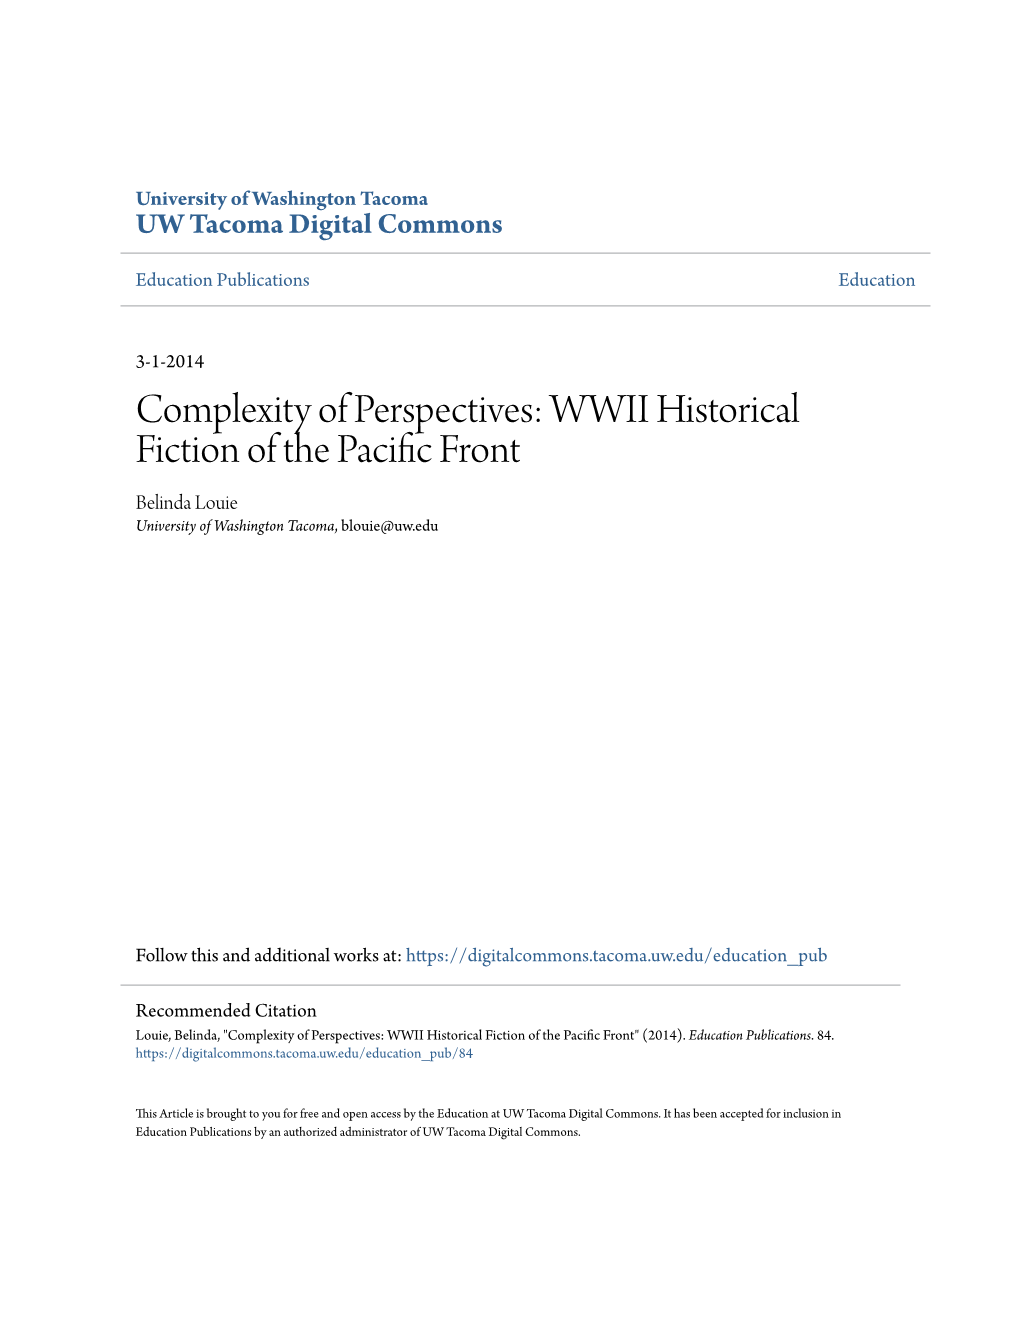 WWII Historical Fiction of the Pacific Front